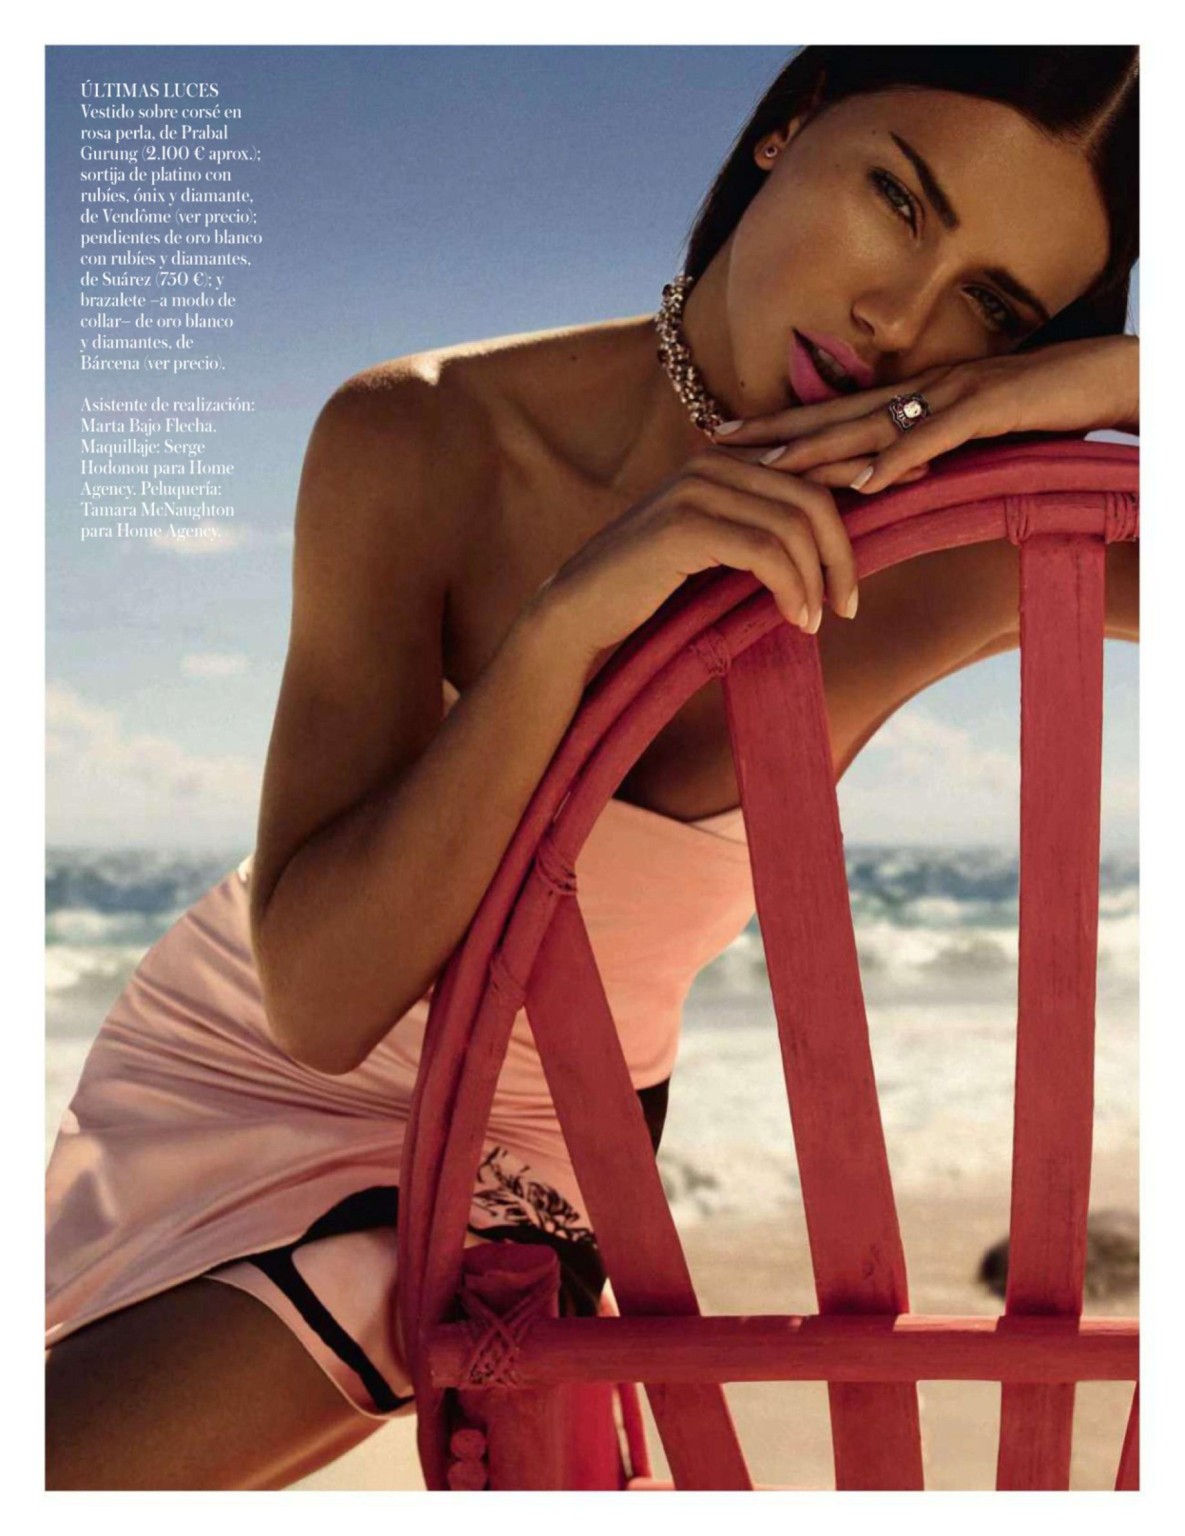 Adriana Lima looking very hot in Vogue Spain photoshoot #75198267